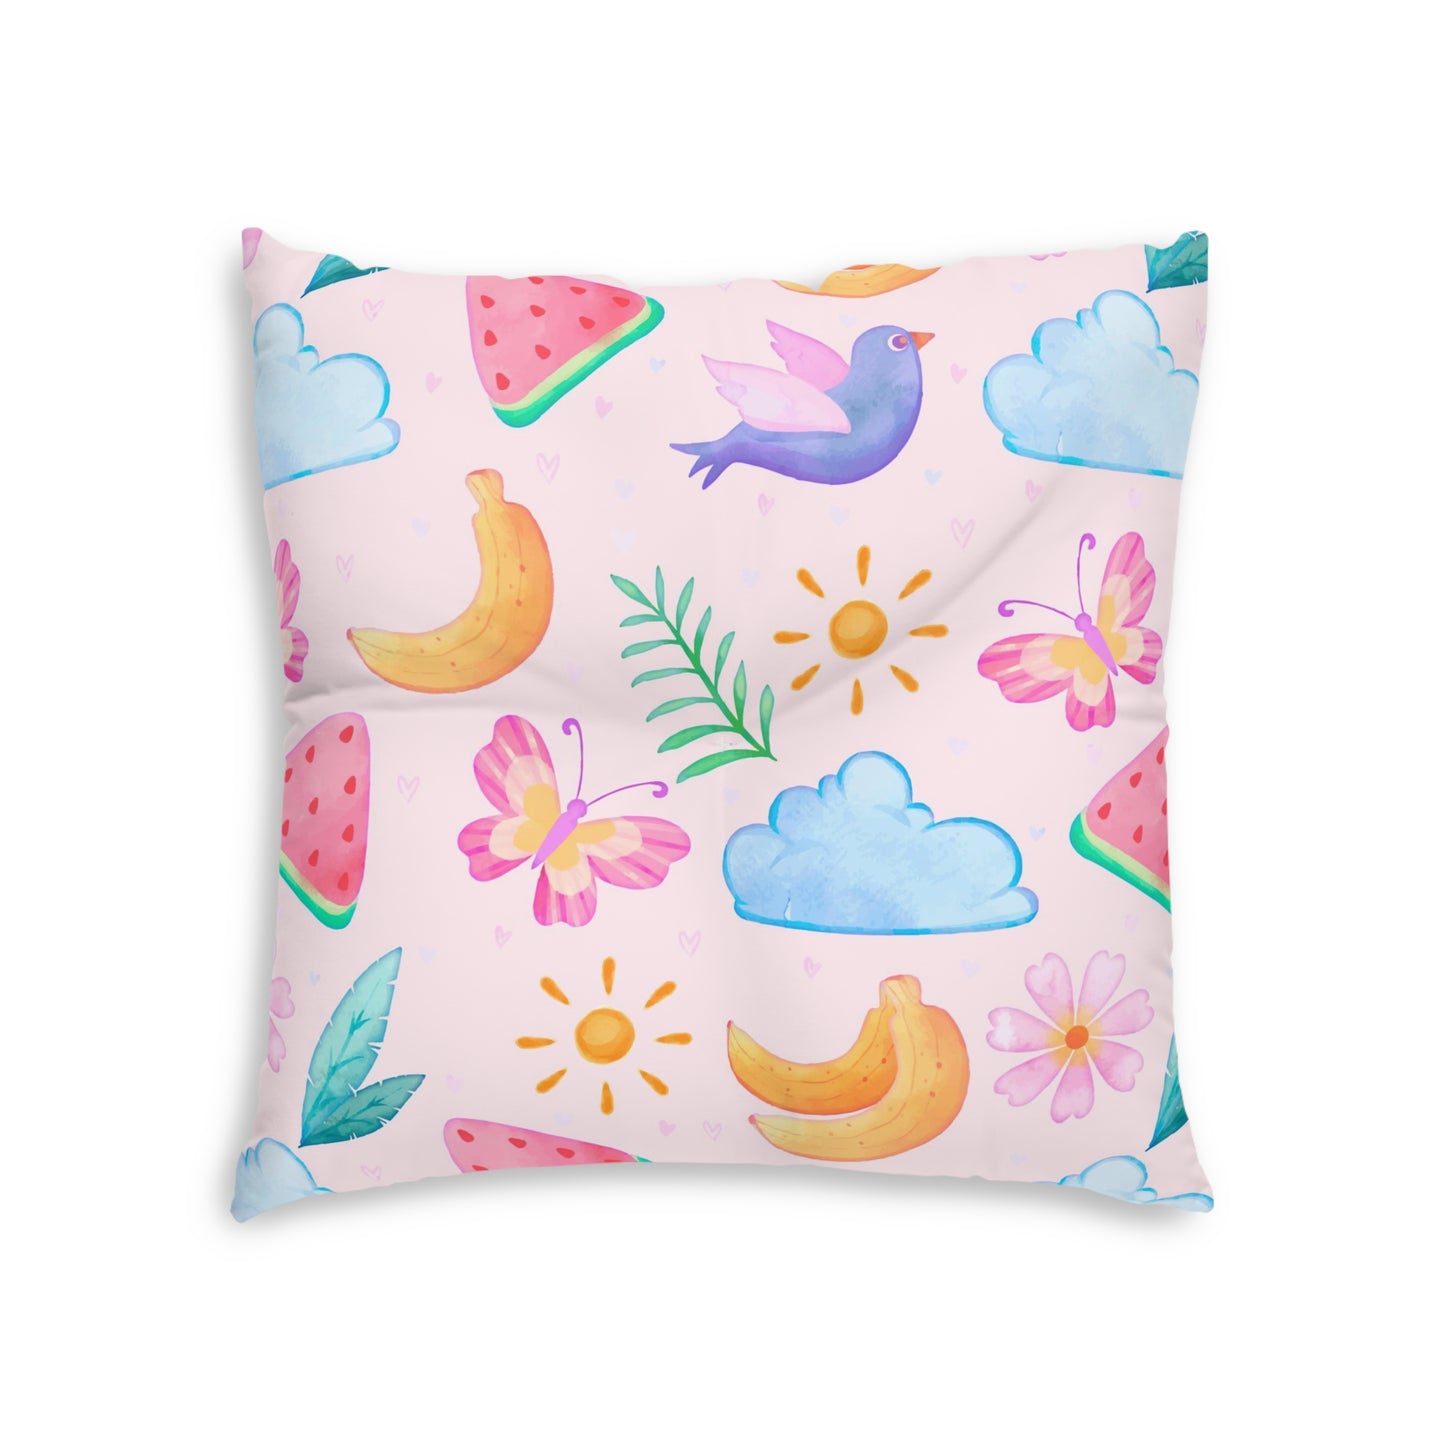 Niccie's Vibrant Square Cushion: Colorful Pattern Tufted Floor Pillow